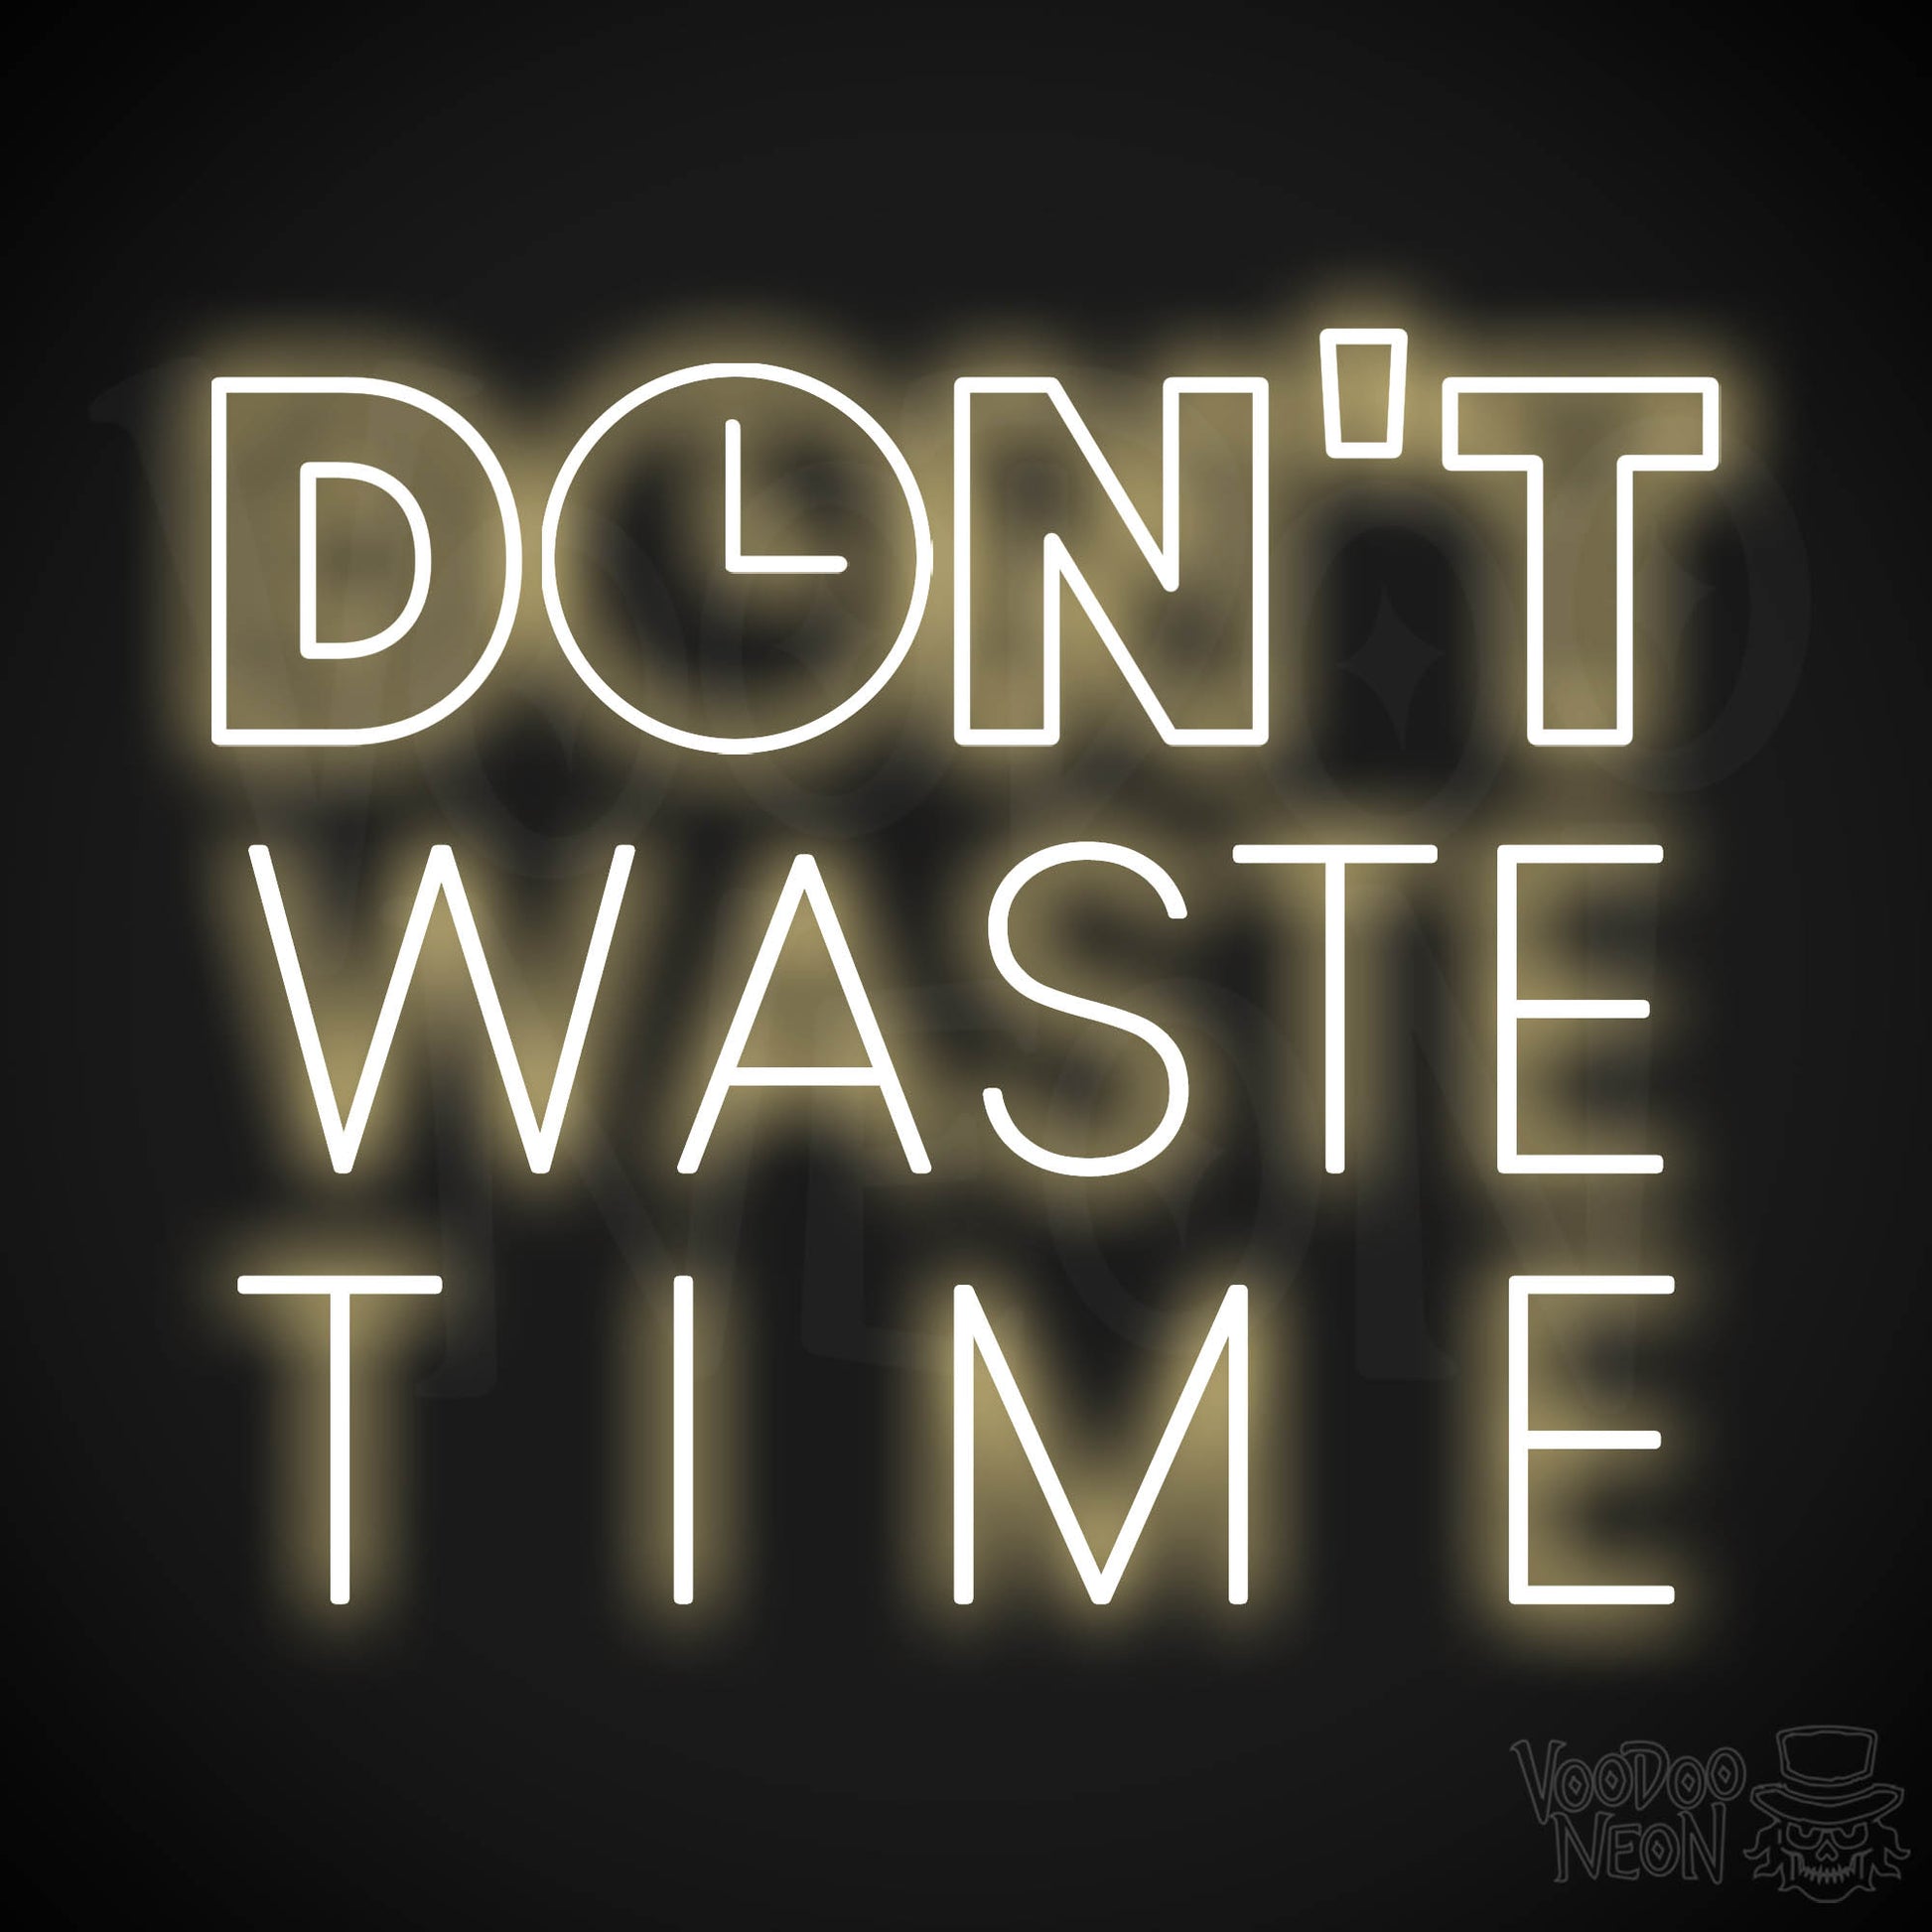 Don't Waste Time LED Neon - Warm White